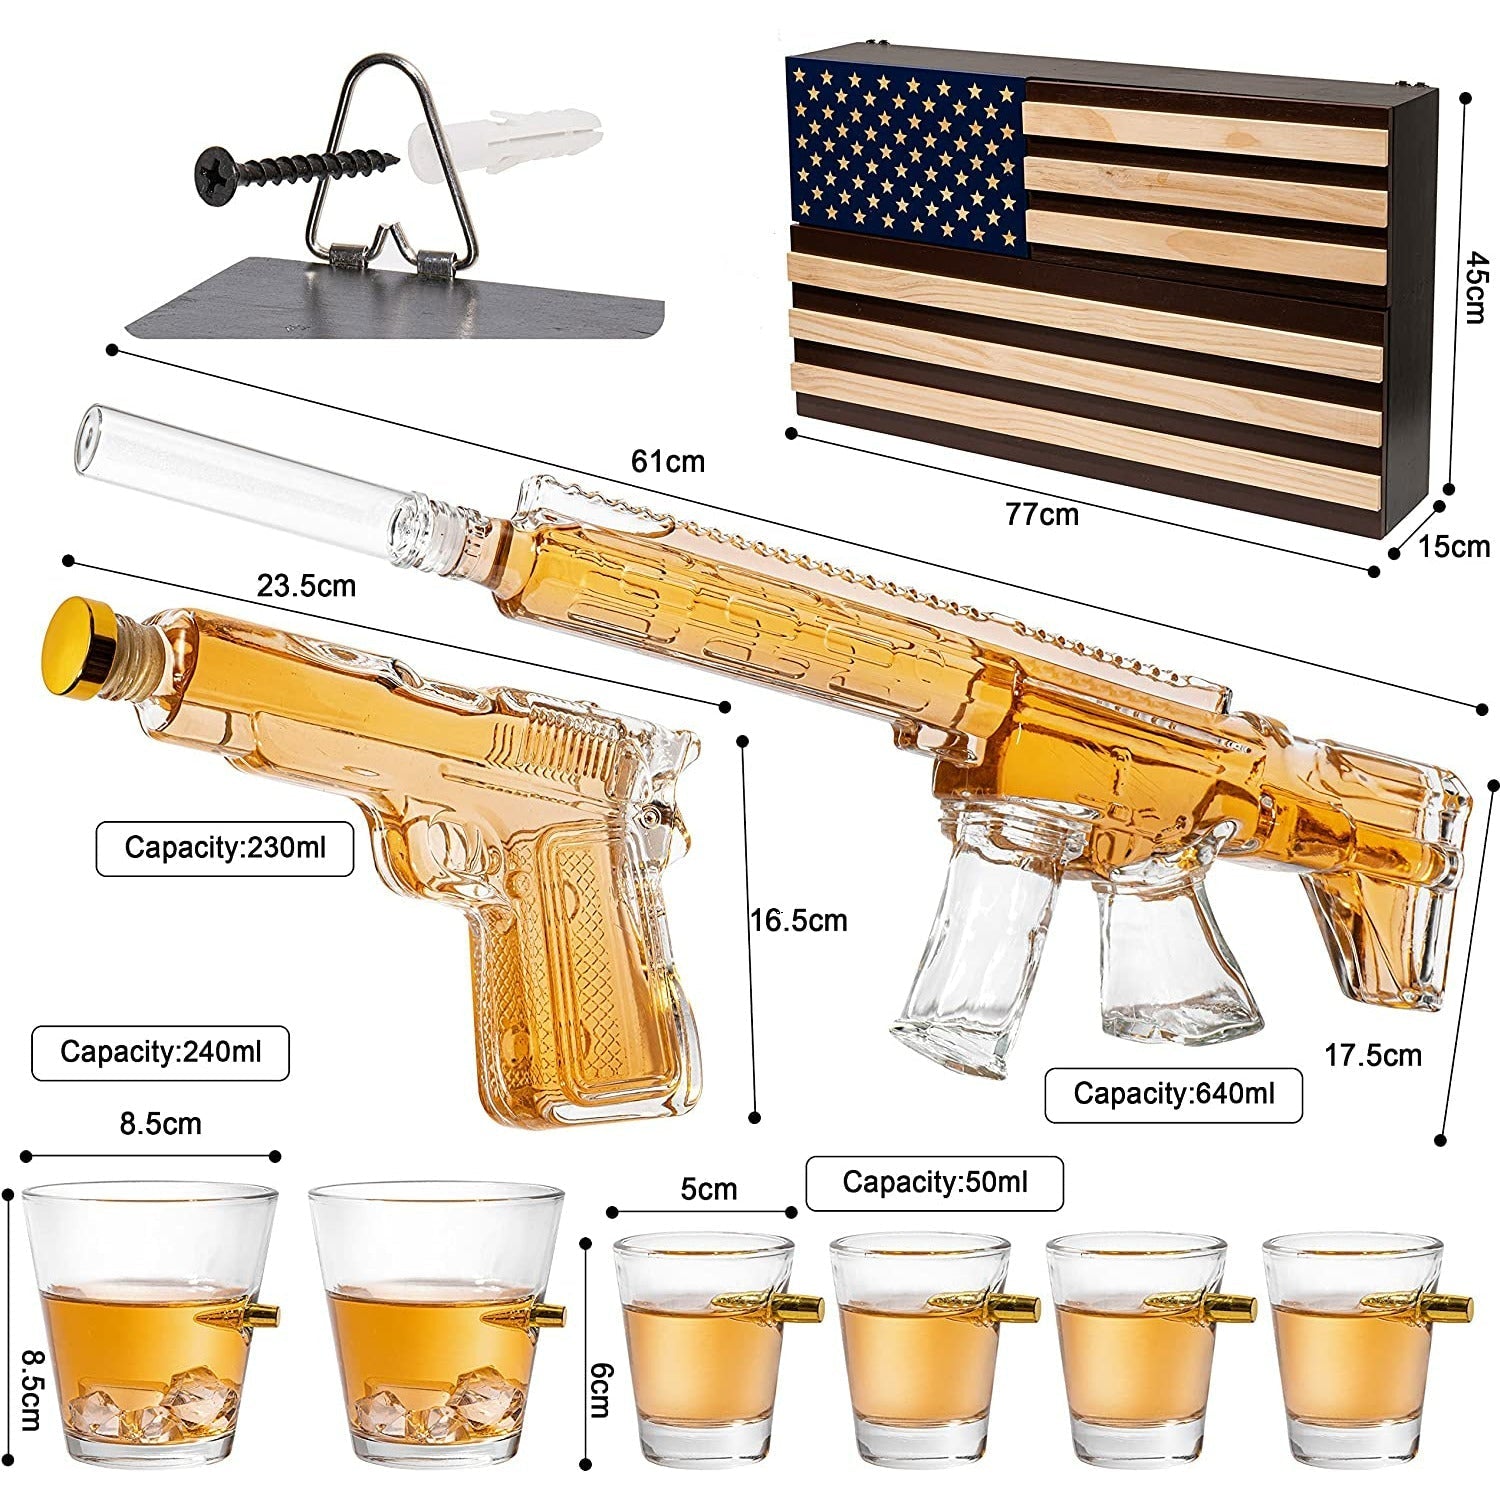 Pistol & AR15 Whiskey Decanter Set of 2 on Hidden Storage American Flag Wall Rack by The Wine Savant with 4 Bullet Shot Glasses & 2 Bullet Whiskey Glasses - Veteran Gifts, Military Gift, Home Bar Gift-6